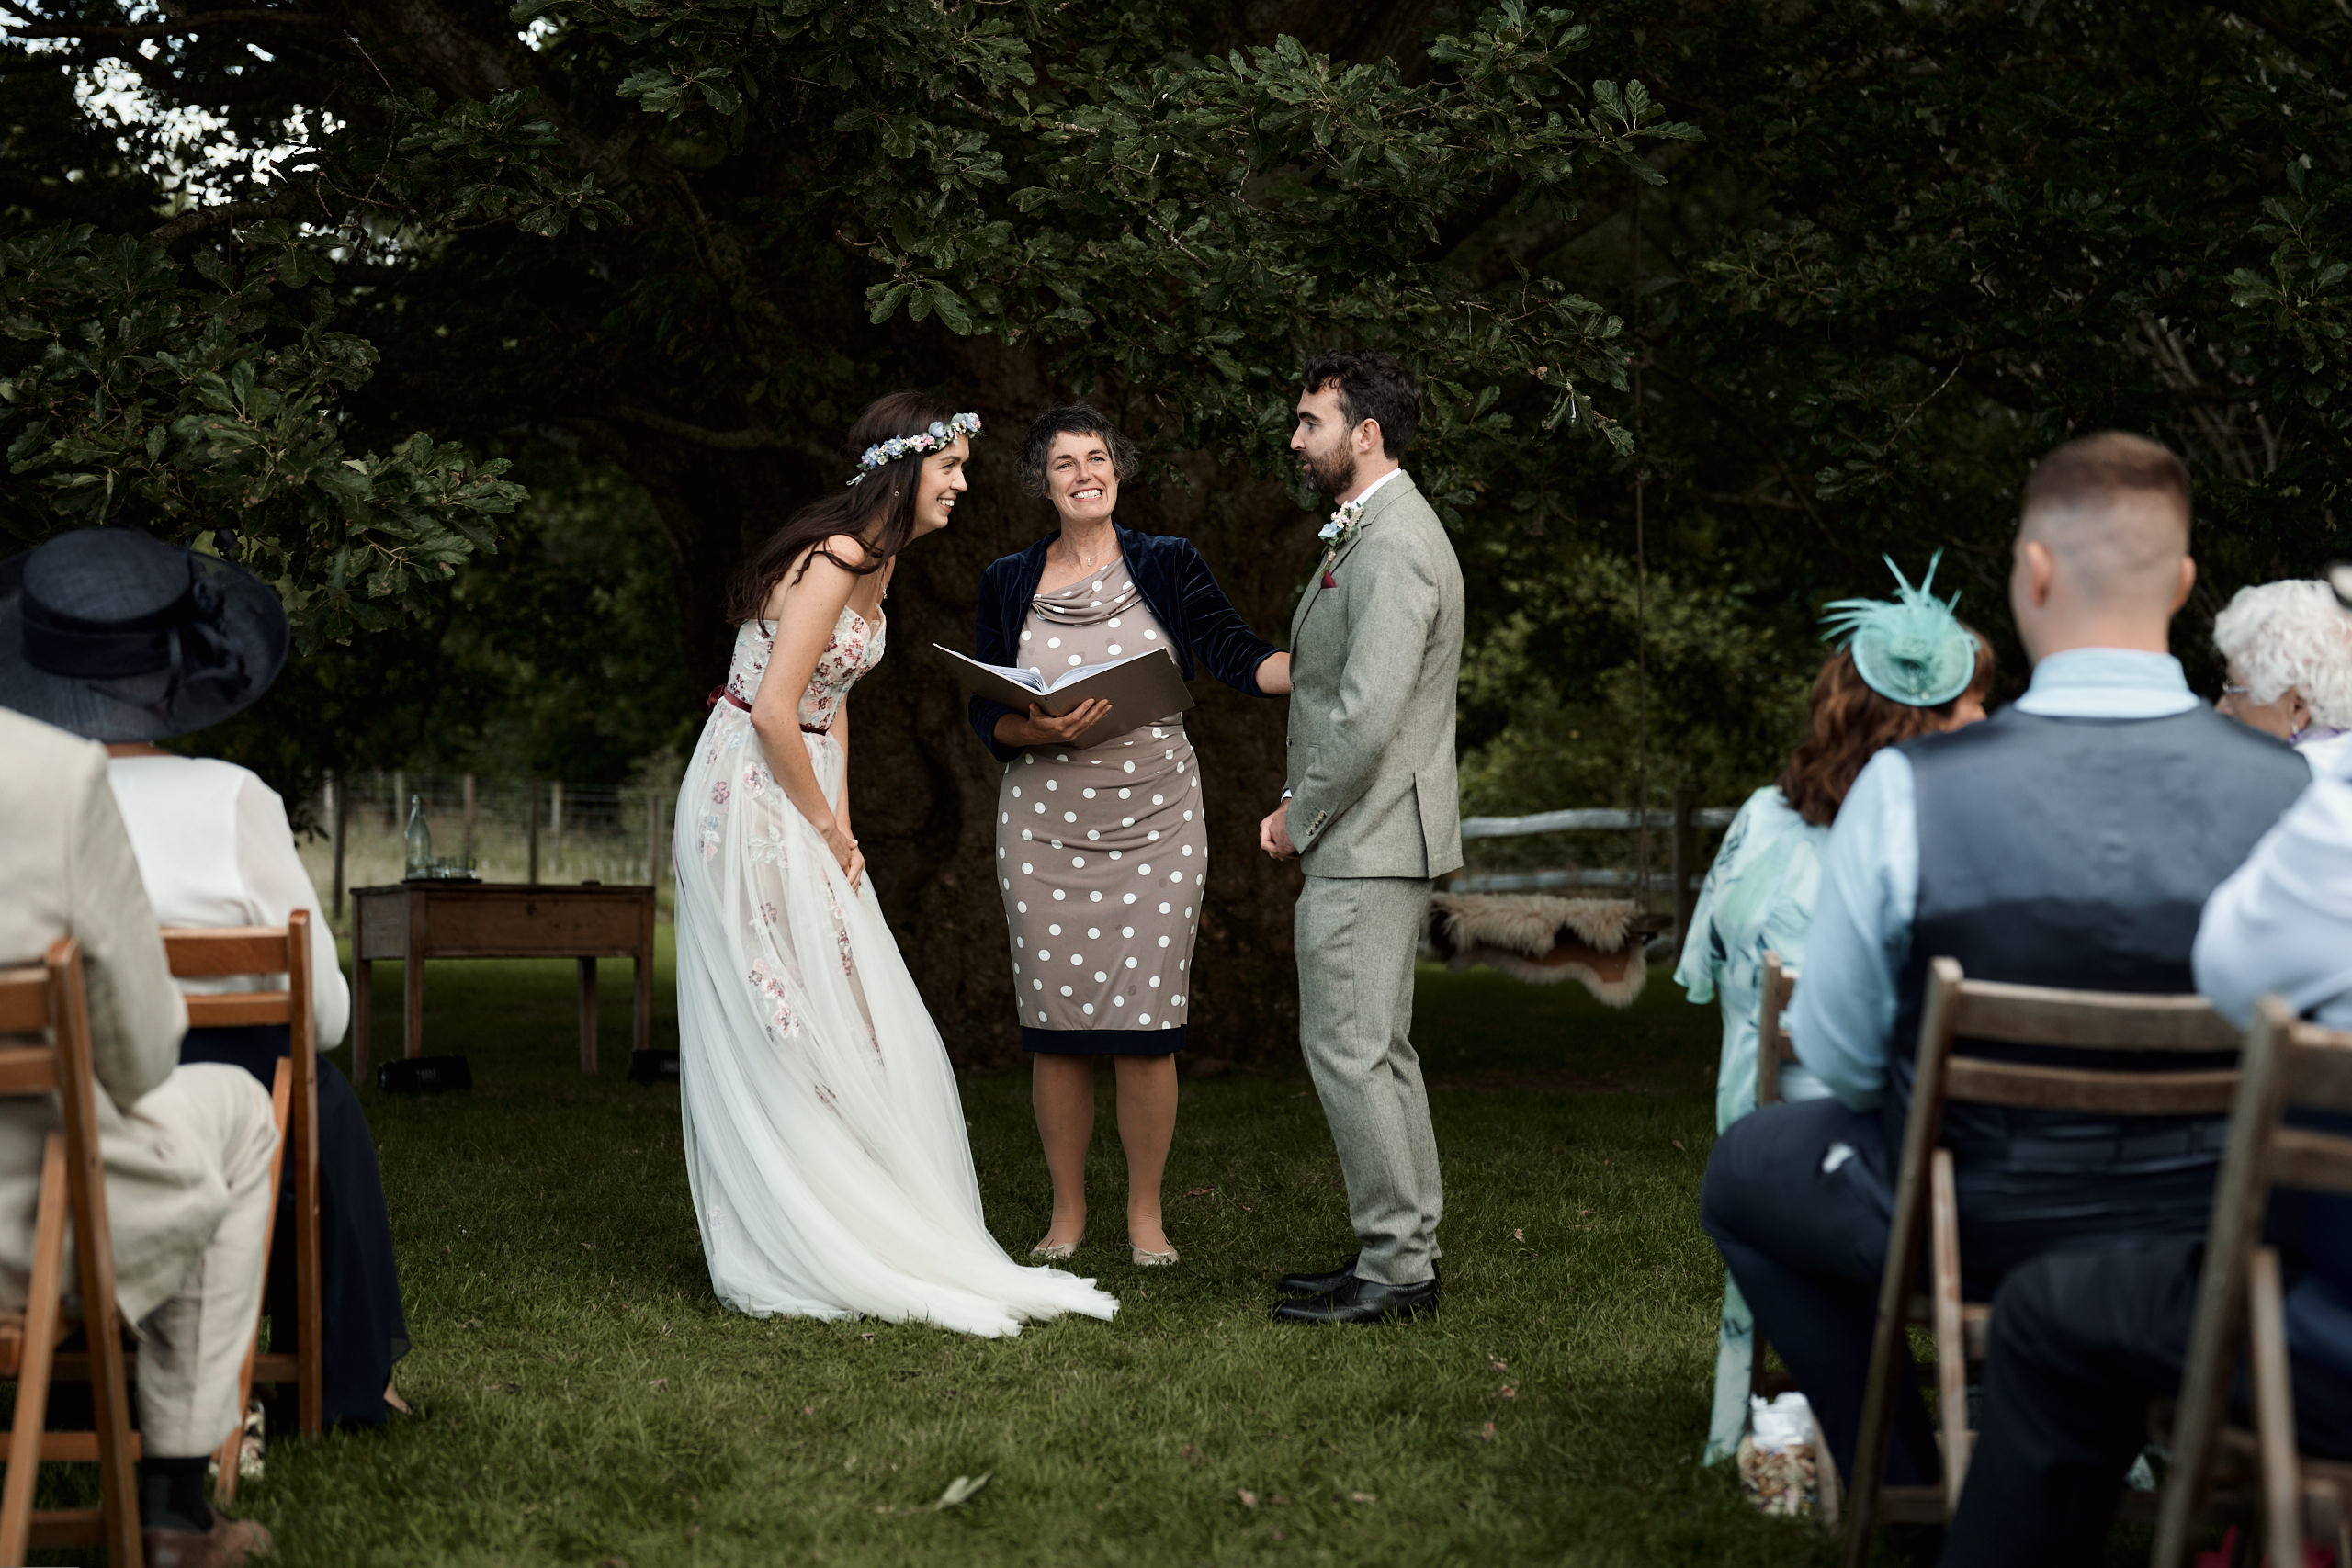 A couple getting married are saying their promises to each other beneath a tree.